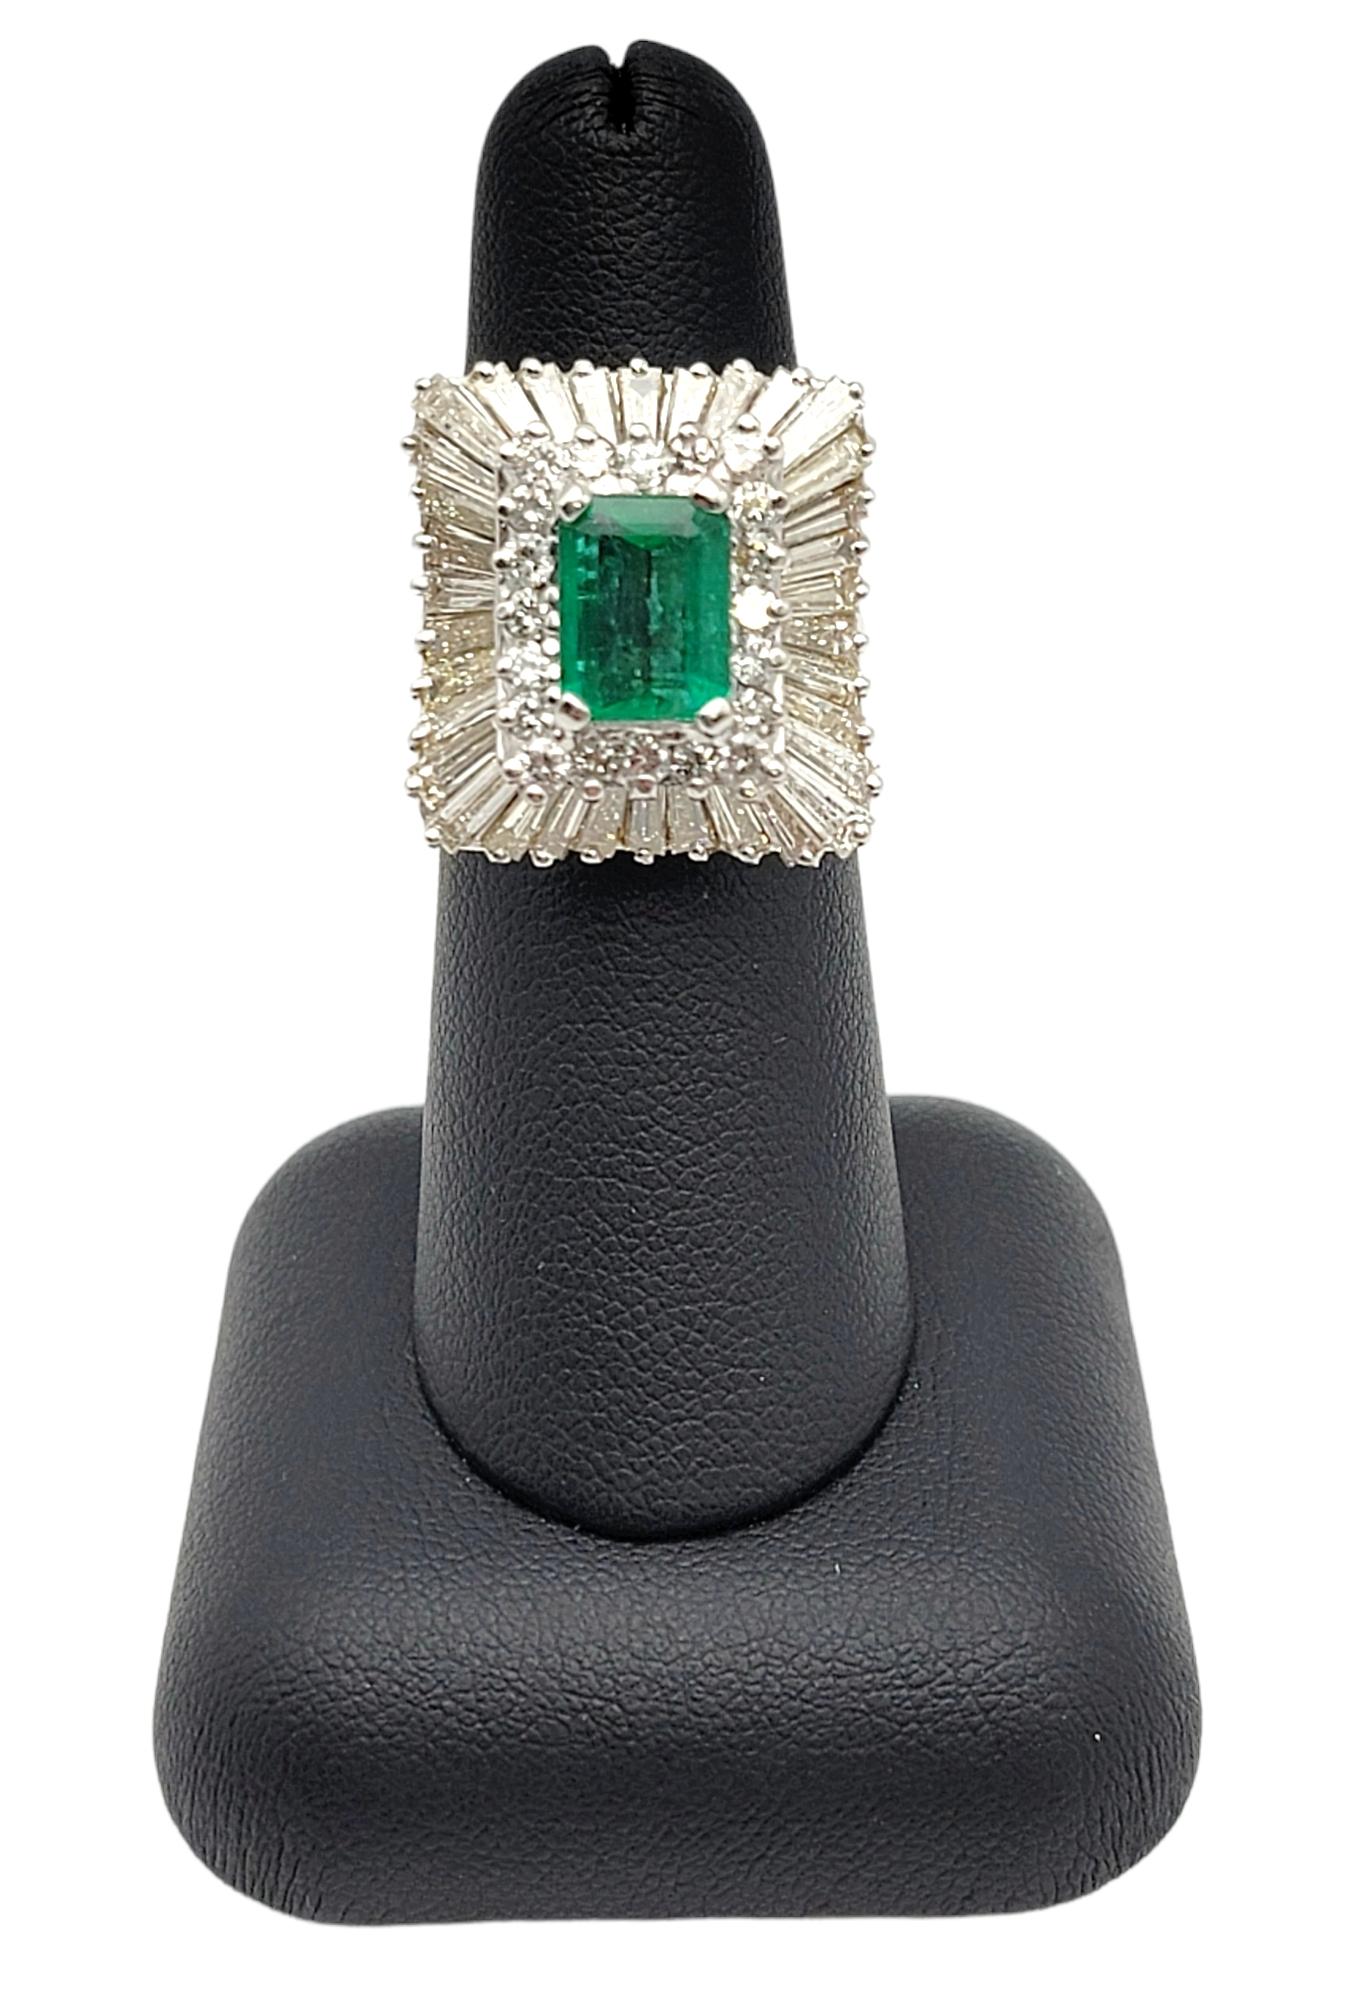 3.07 Carats Total Emerald Cut Emerald and Diamond Cocktail Ring 14 Karat Gold For Sale 2